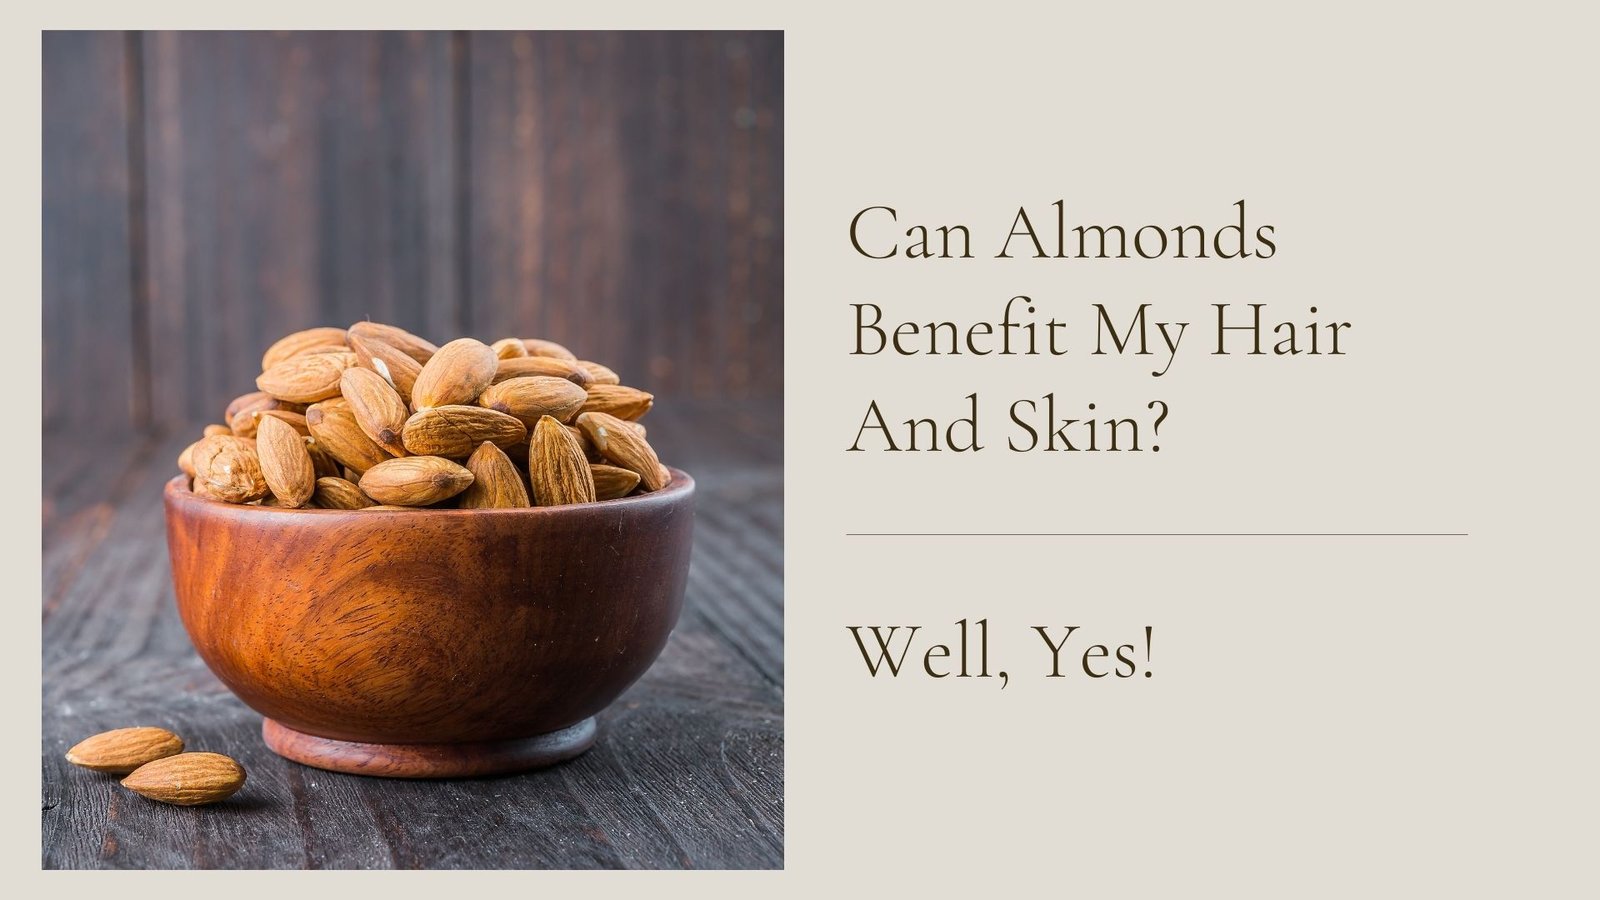 Can Almonds Benefit My Hair And Skin?